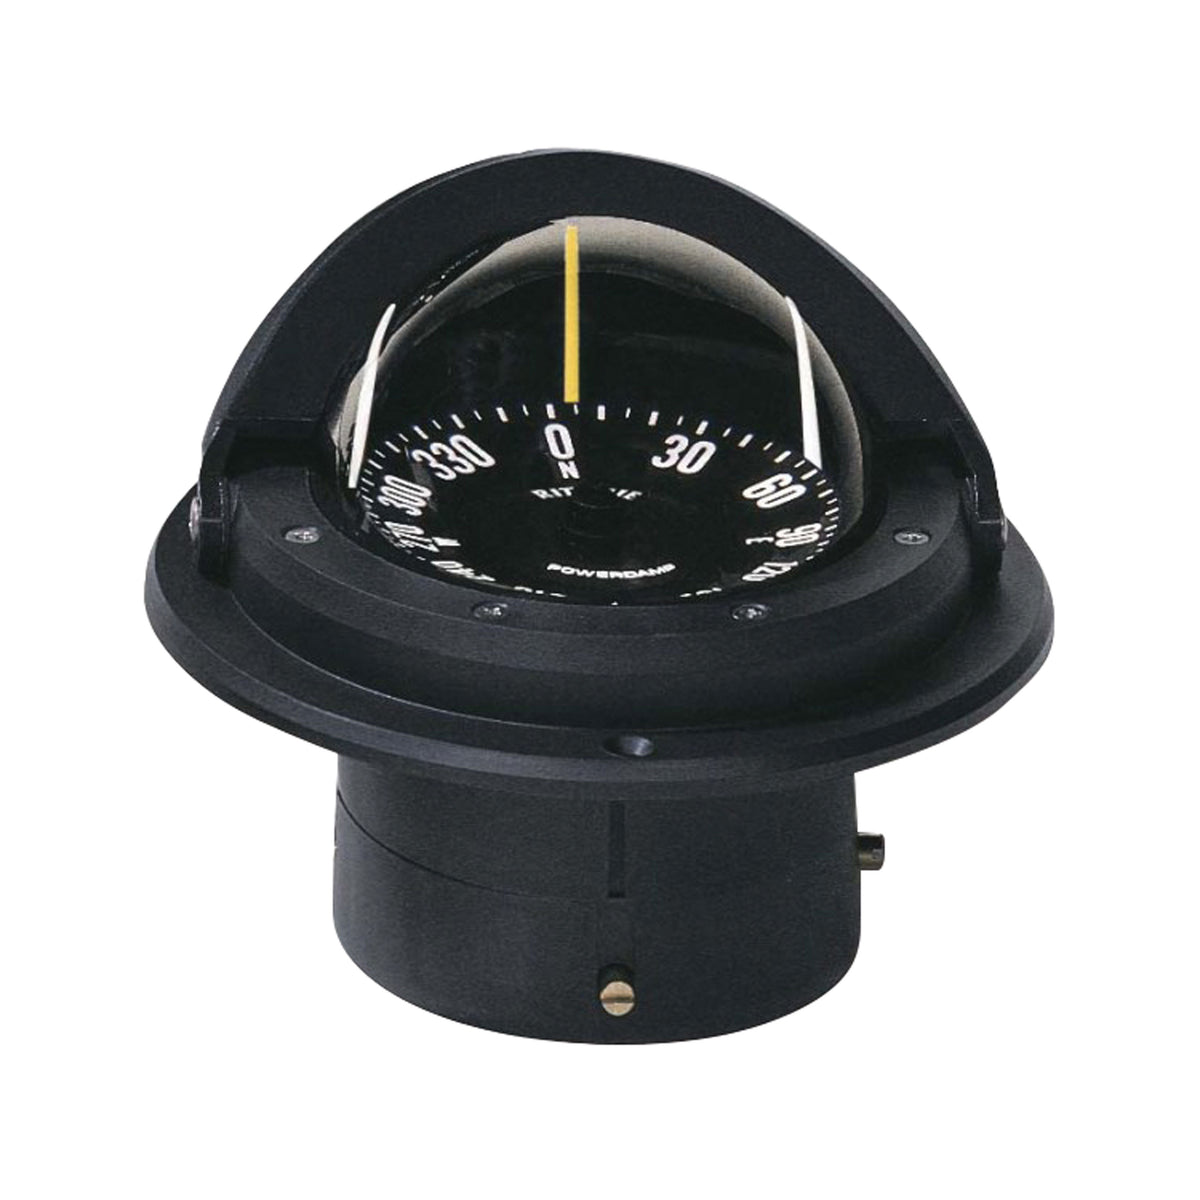 Ritchie Navigation F-82 Voyager Compass - Flush Mount, Black with Black Dial